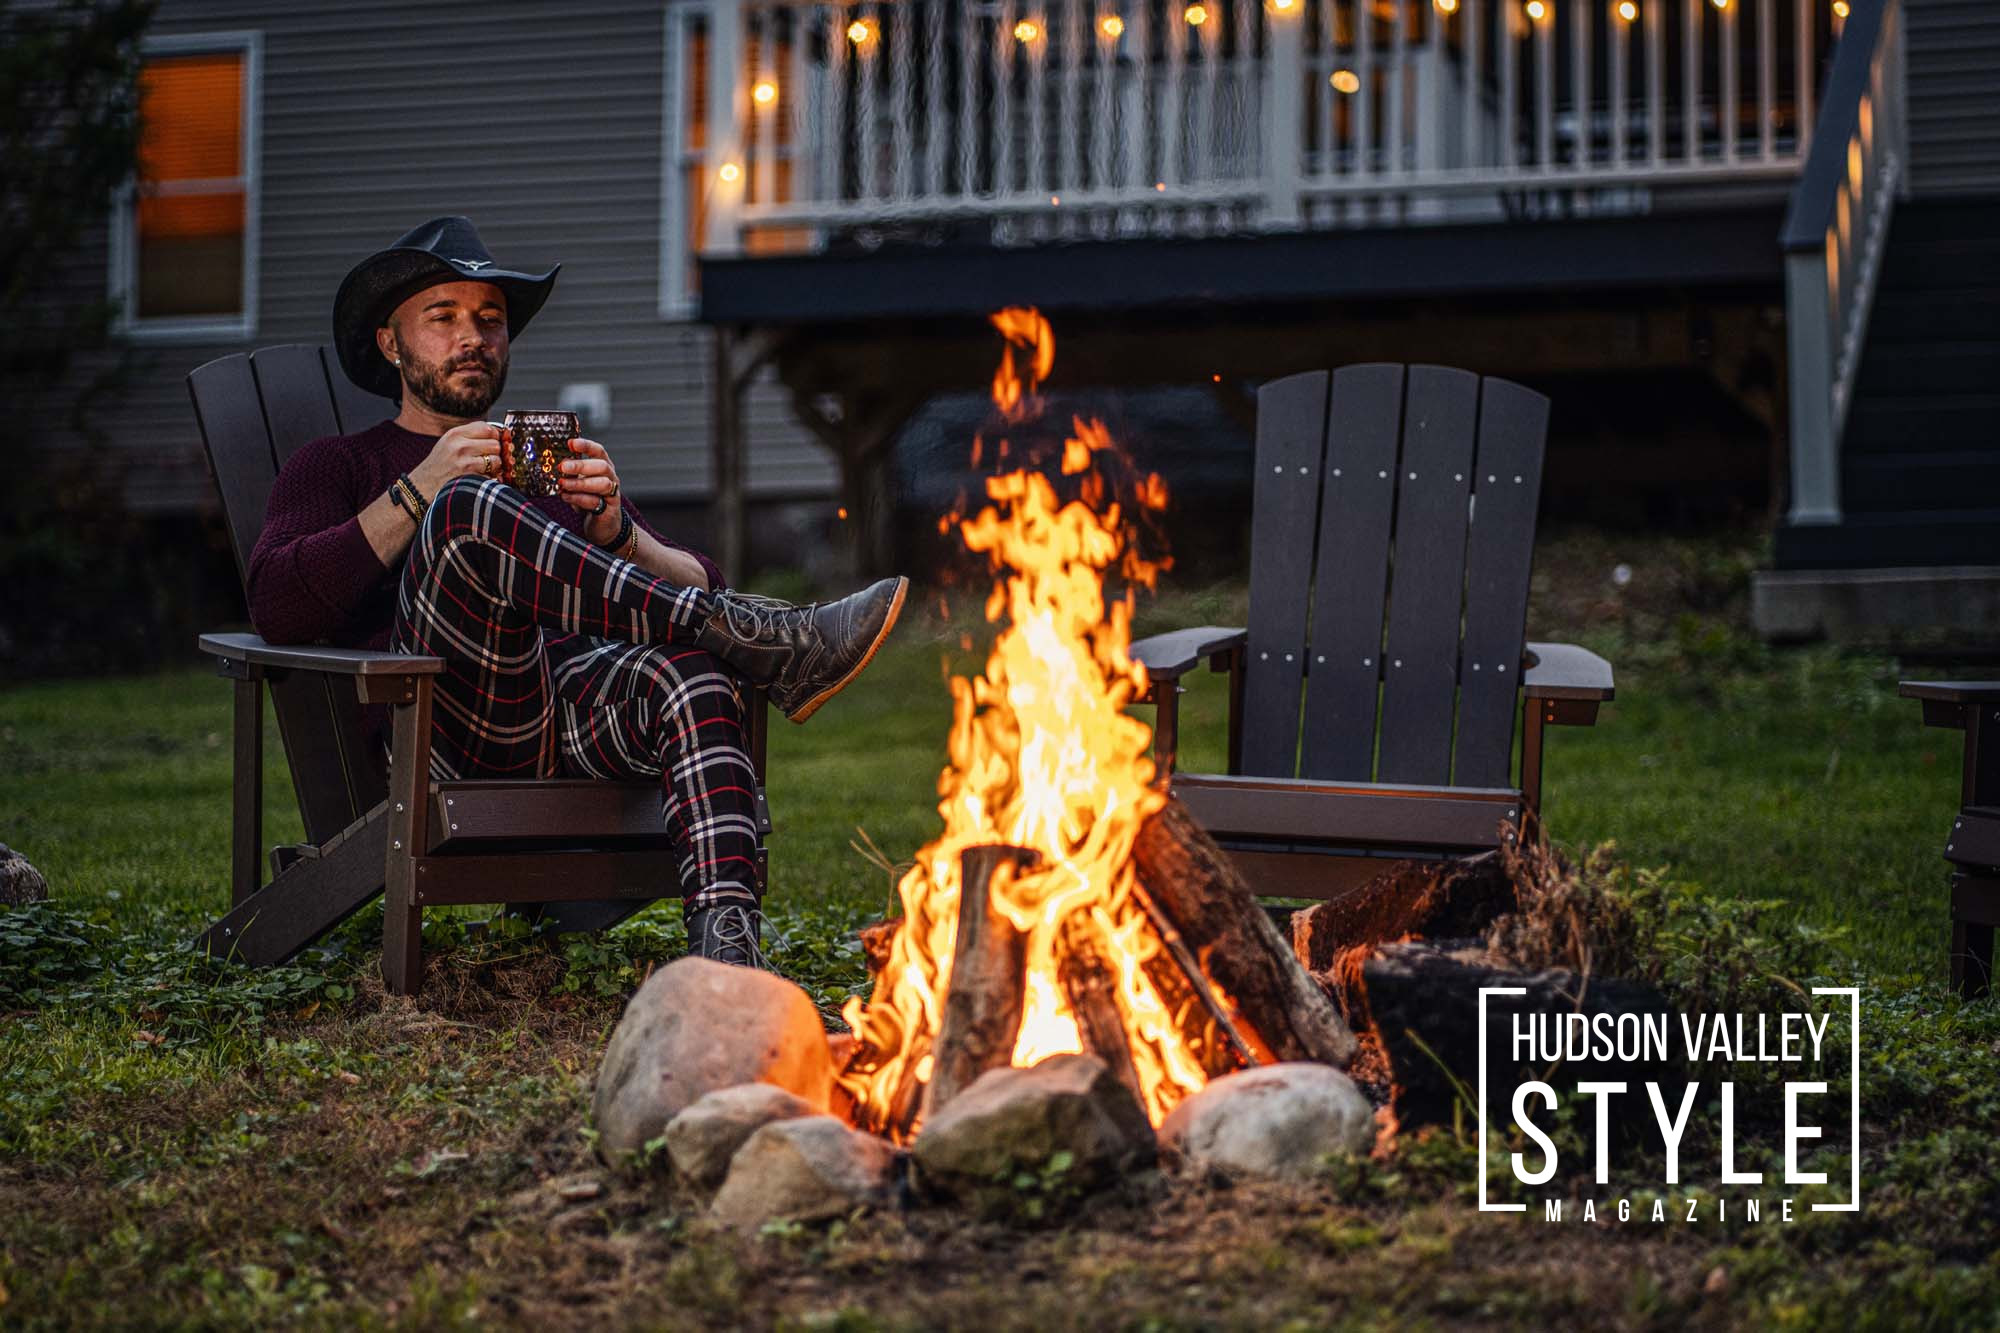 Cozy Up in Style: The Ultimate Guide to a Chic Campfire Catskill Mountains S'mores Experience – Cabin Life with Maxwell Alexander – Presented by Alluvion Vacations